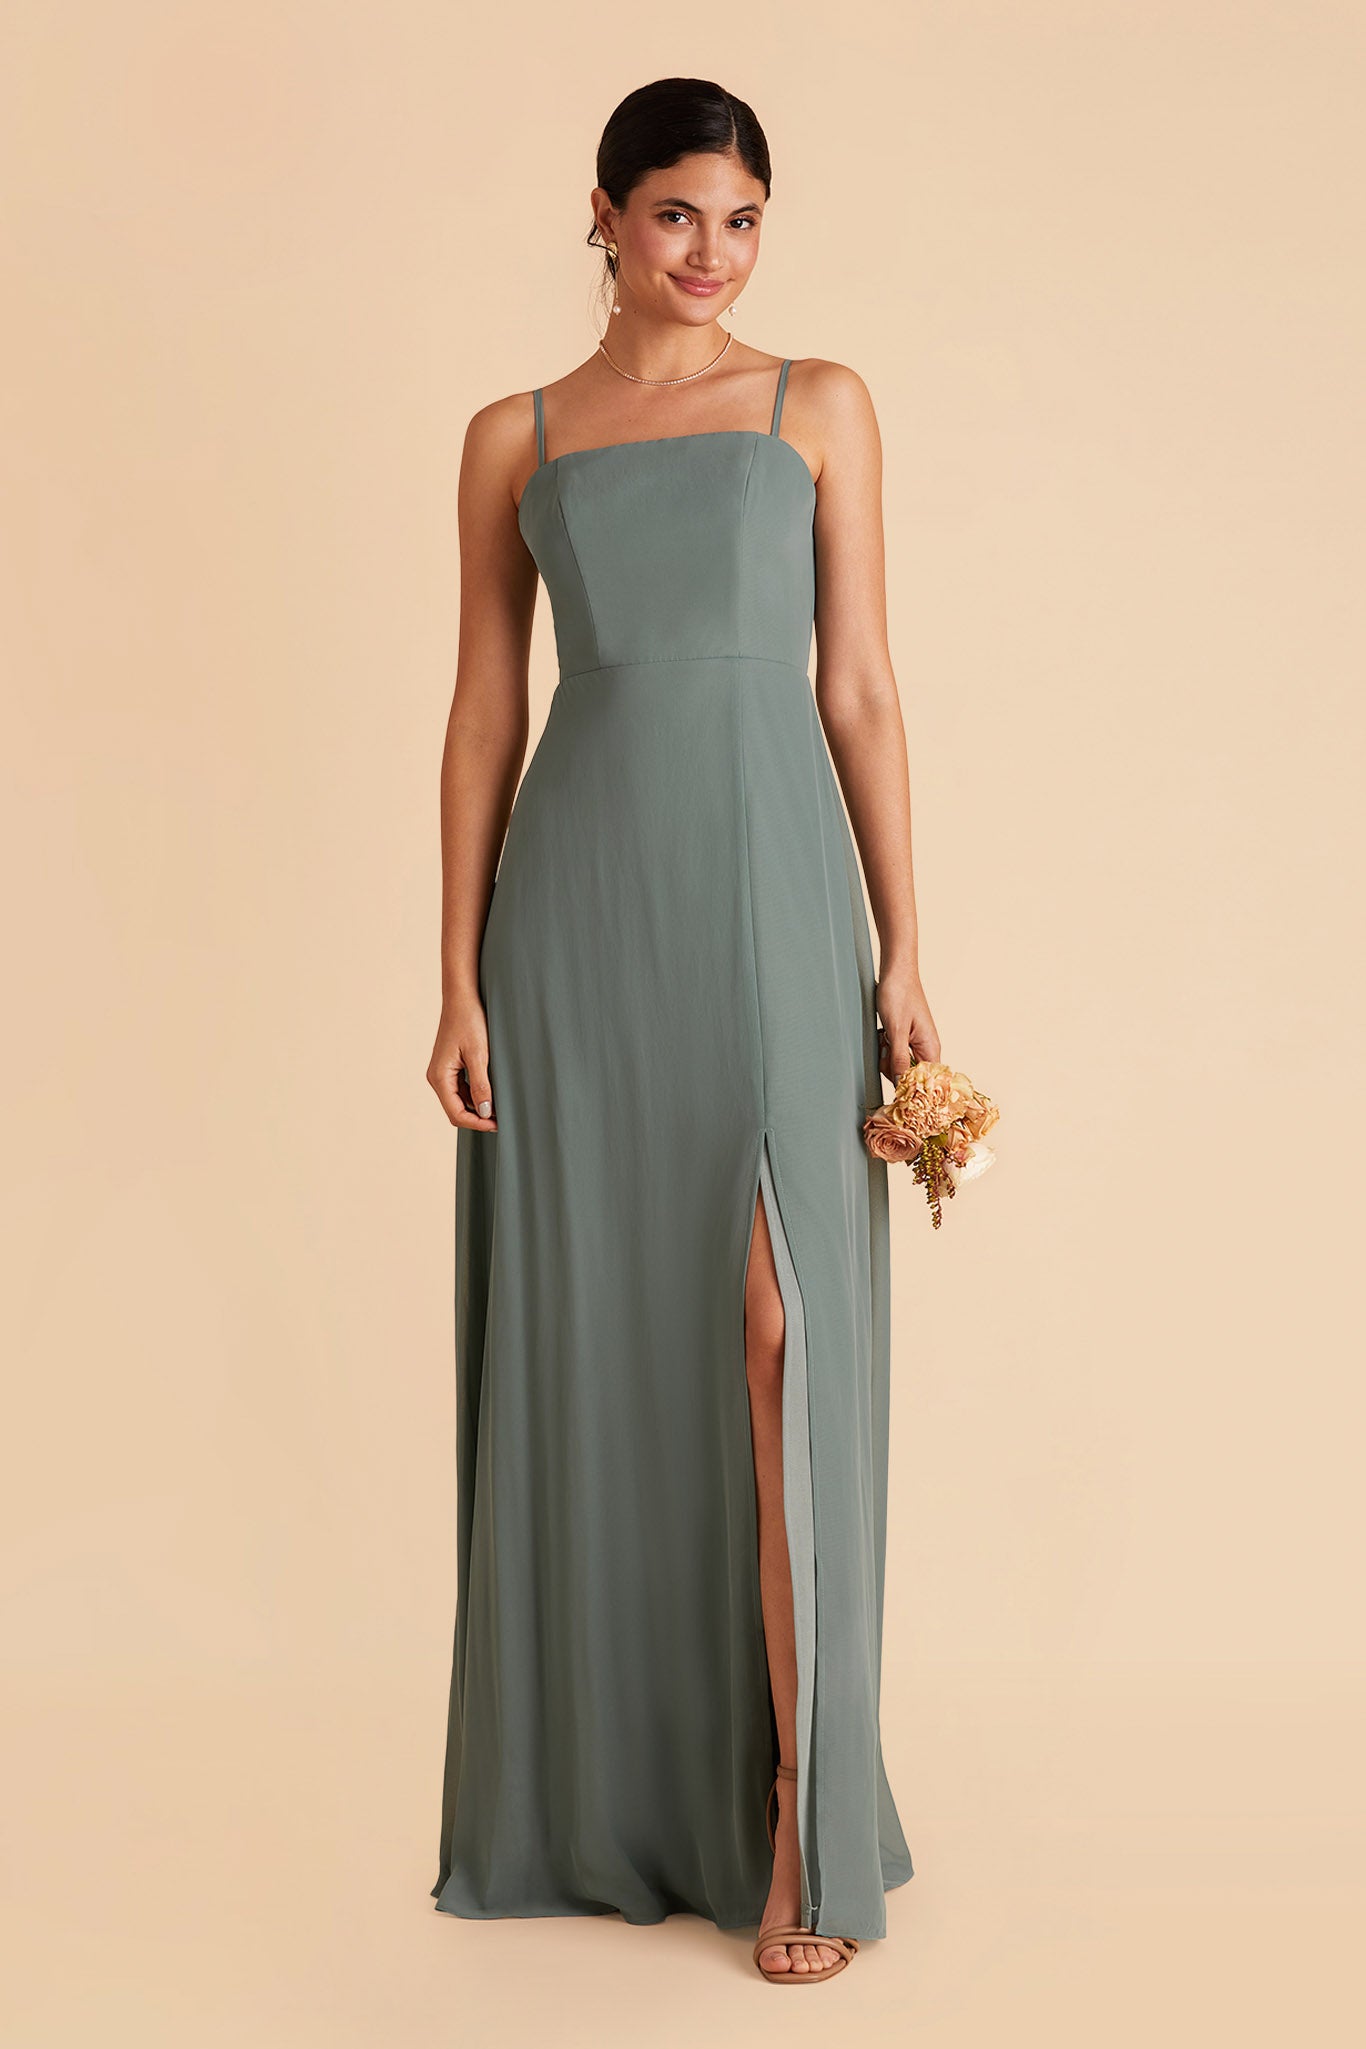 Chris bridesmaid dress with slit in sea glass chiffon by Birdy Grey, front view